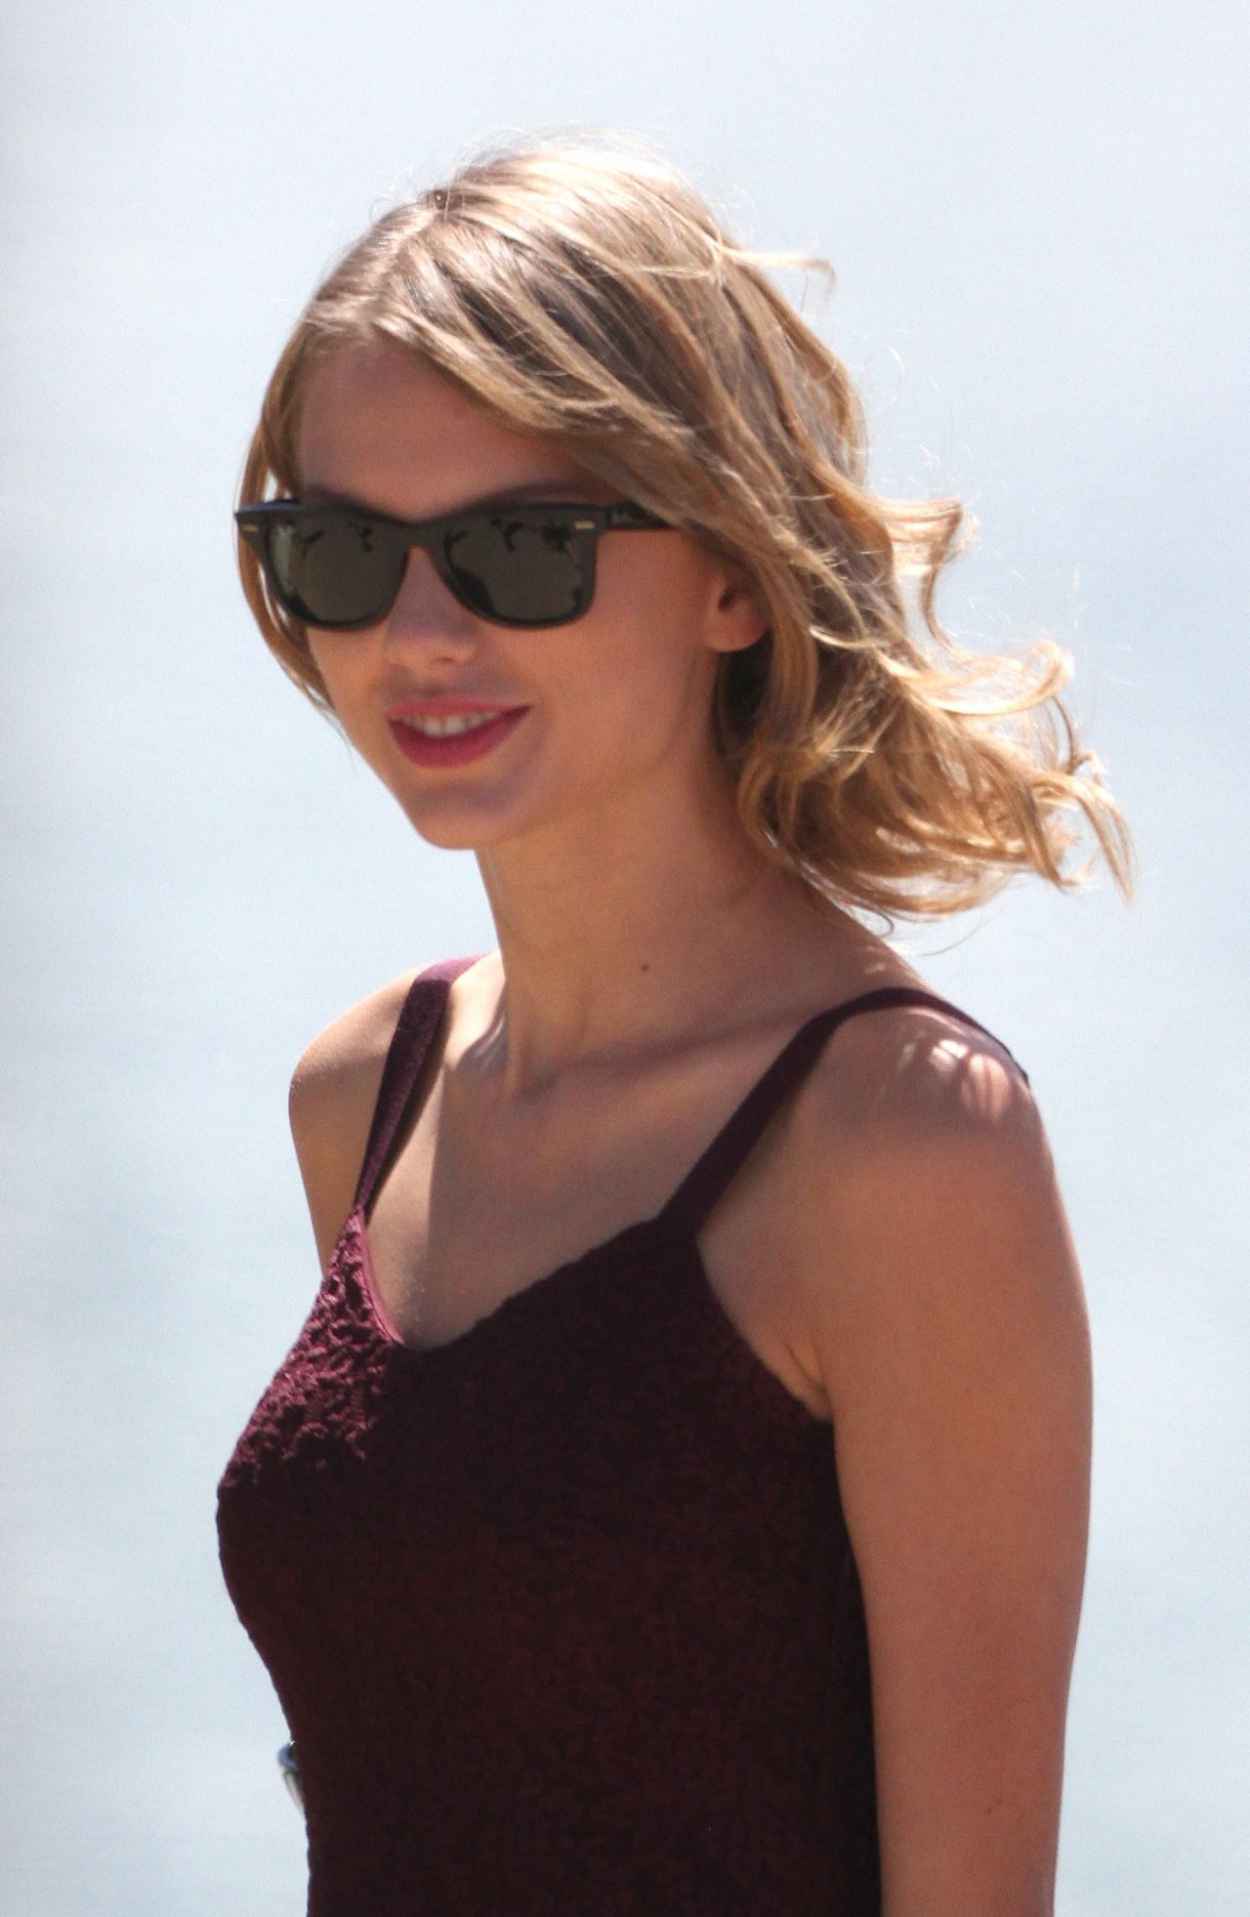 Taylor Swift at Cottesloe Beach in Perth - Australia December 2015-1